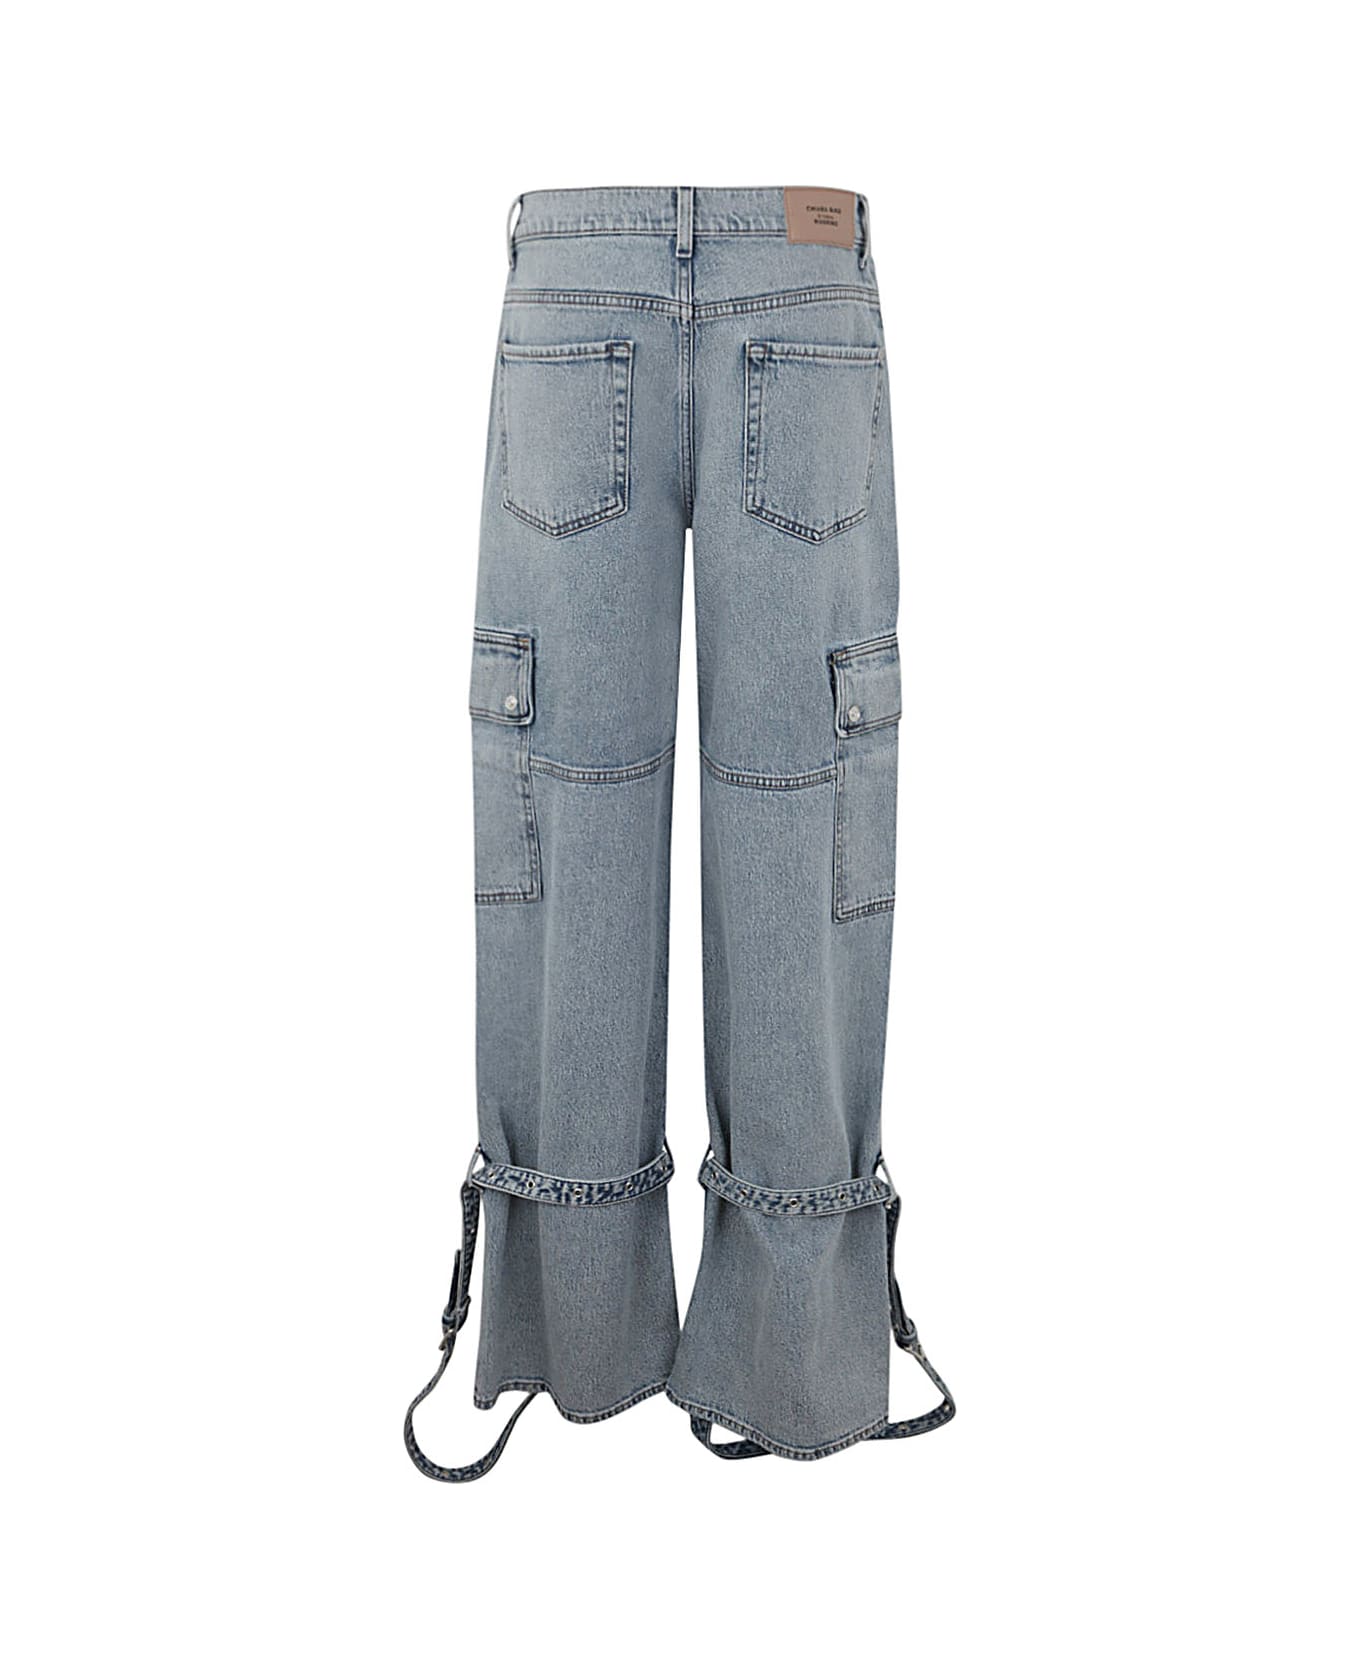 7 For All Mankind Chiara Biasi X 7fam The Belted Cargo Arctic - Light Blue